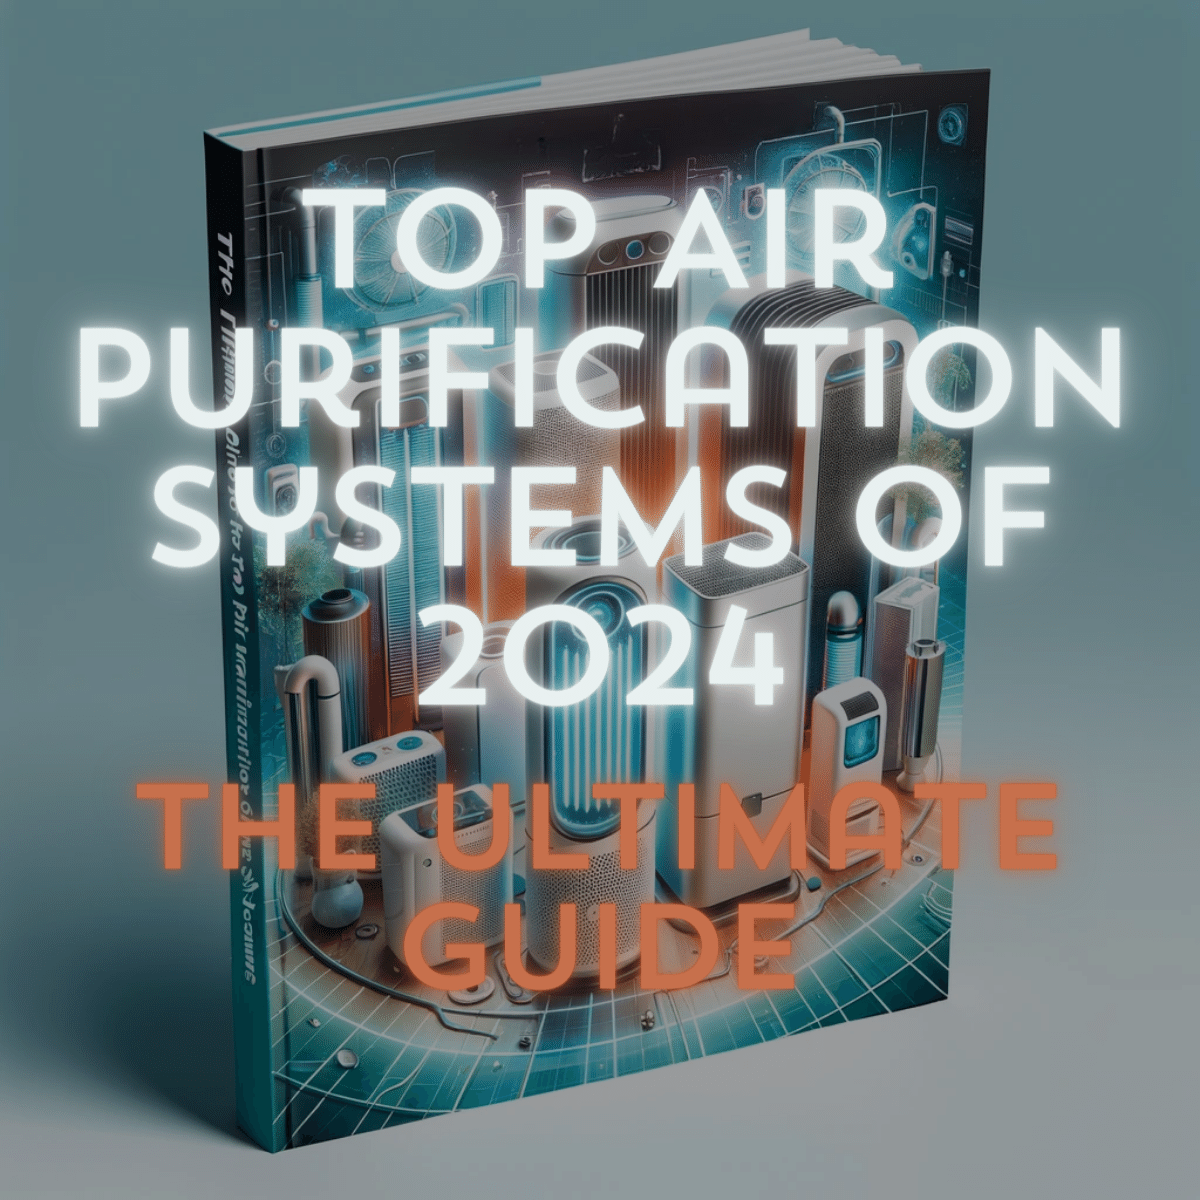 The Ultimate Guide to the Top Air Purification Systems of 2024